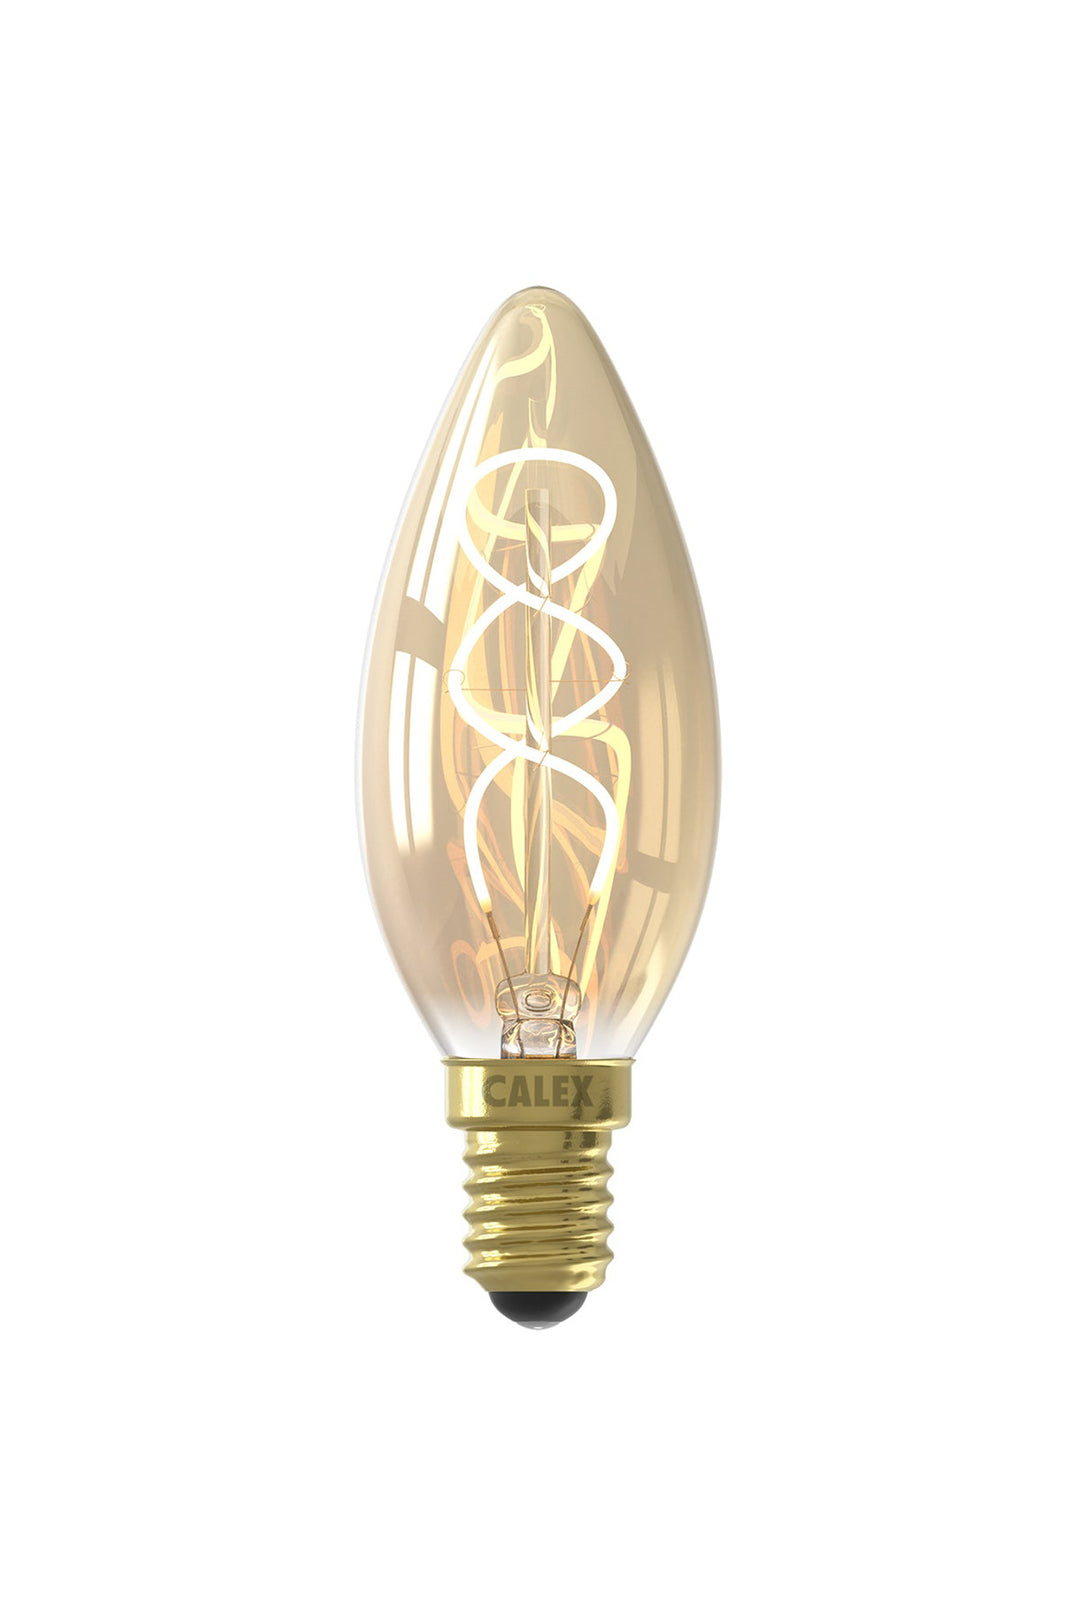 Calex Candle B35 Gold Flex Filament, E14, Dimmable with LED Dimmer 1001002900